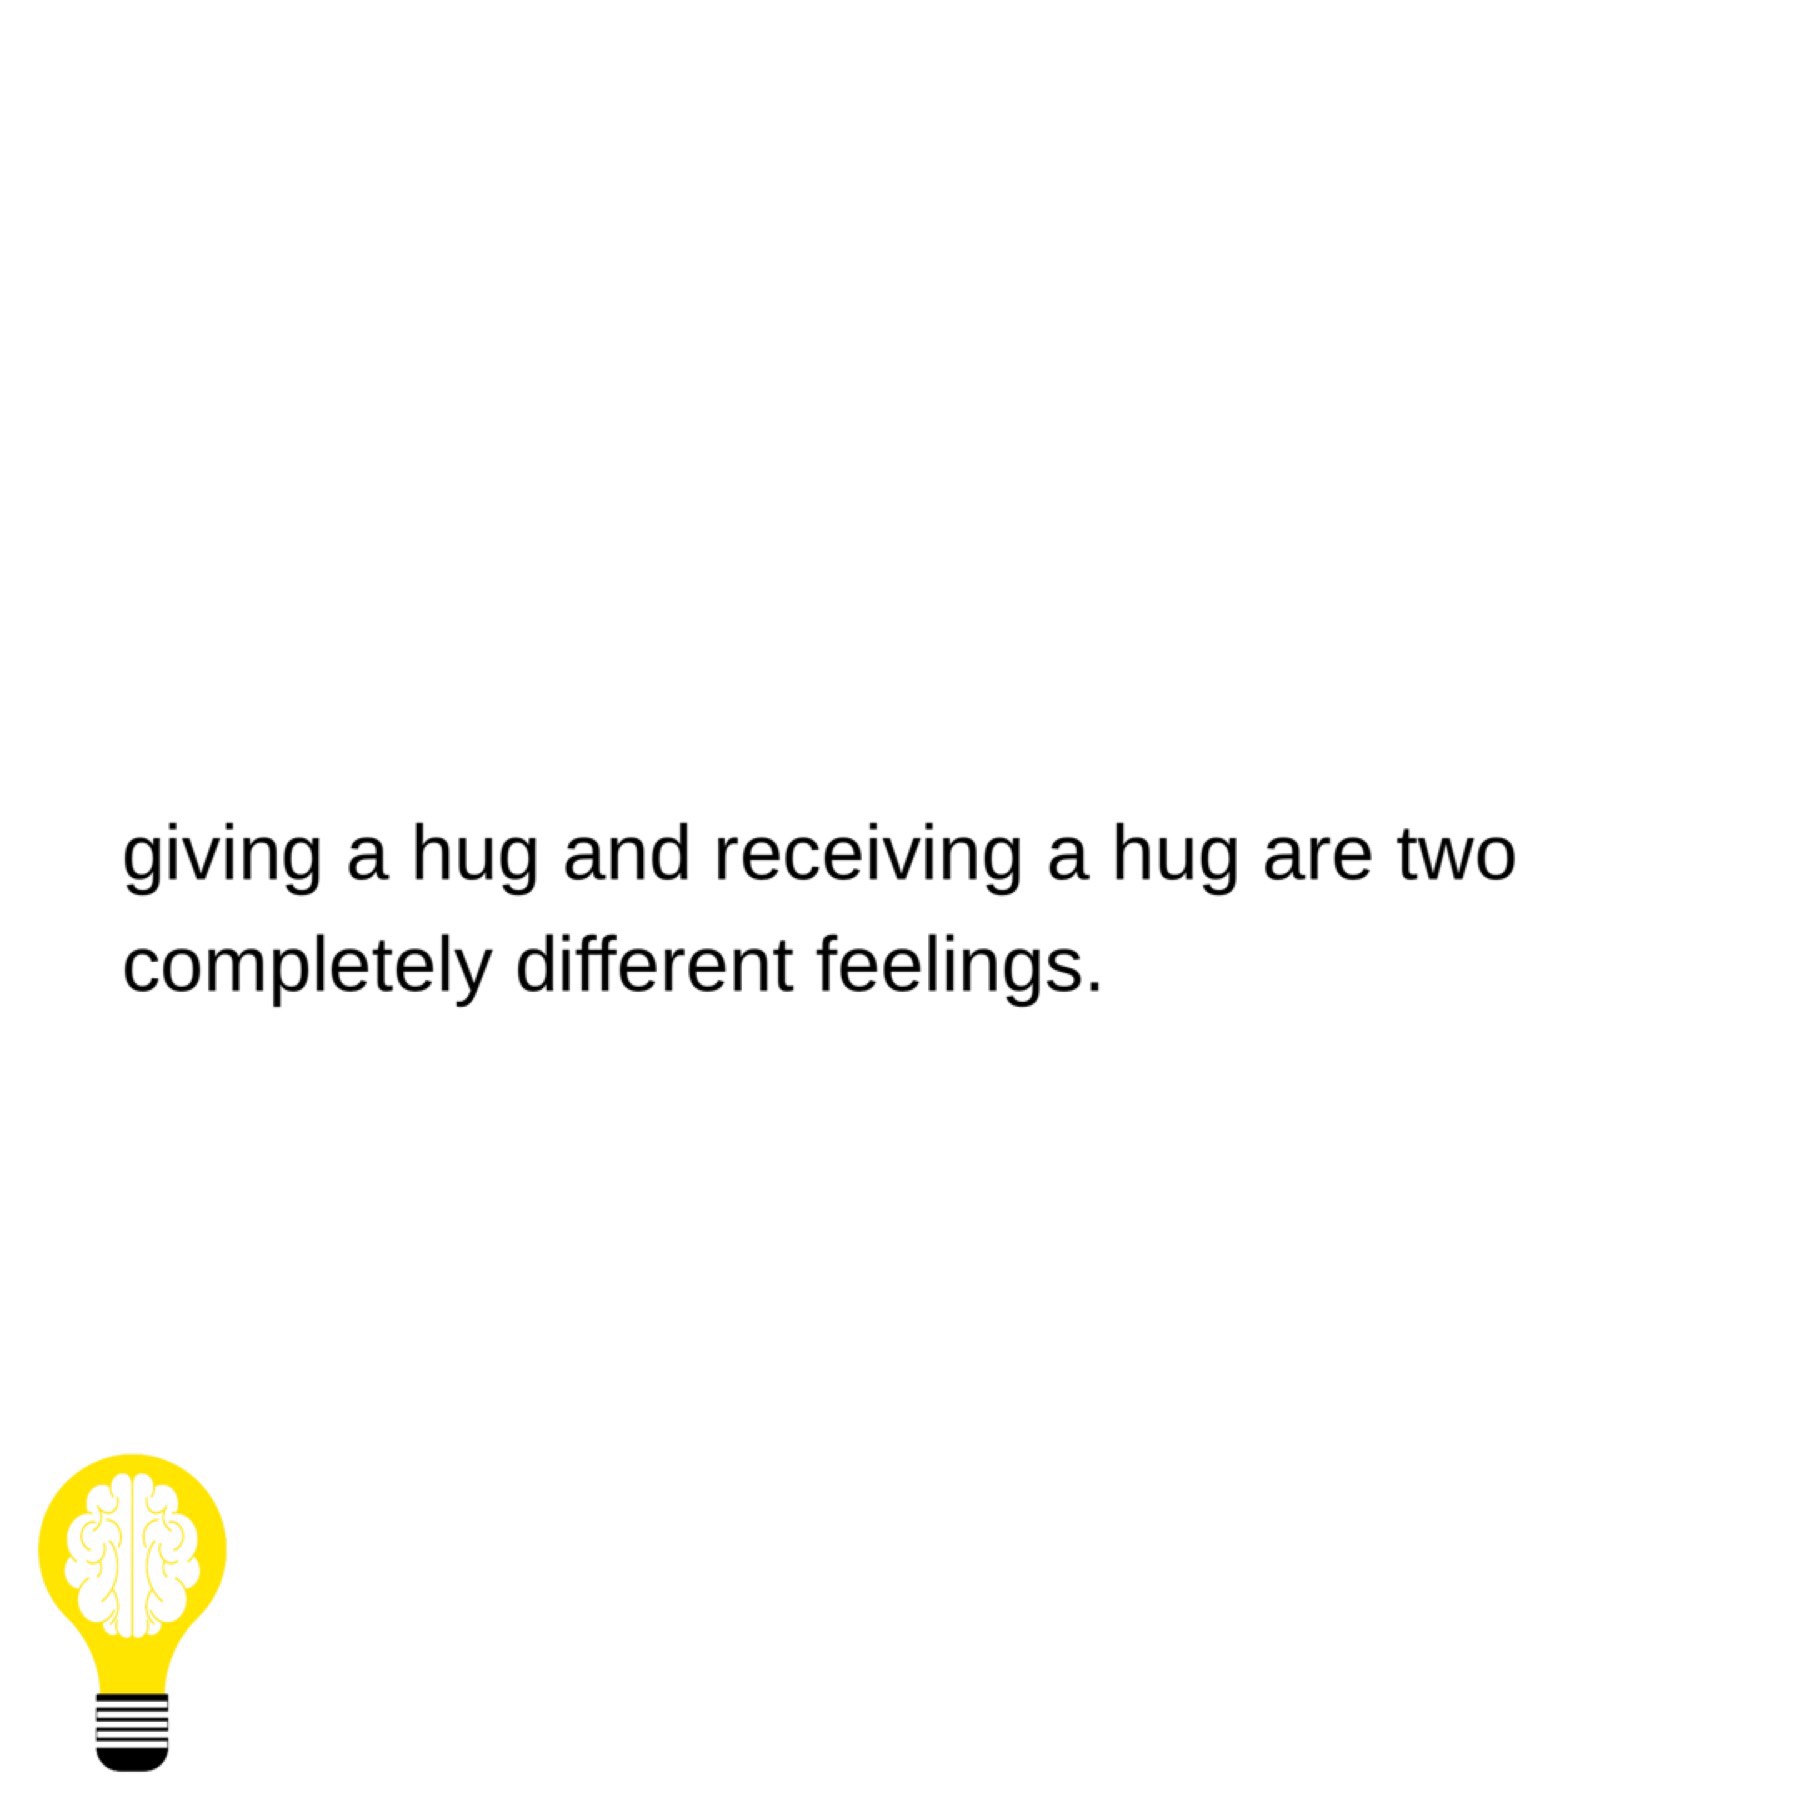 tap for question 💖

what makes you feel happier,
giving a hug, or receiving a hug?